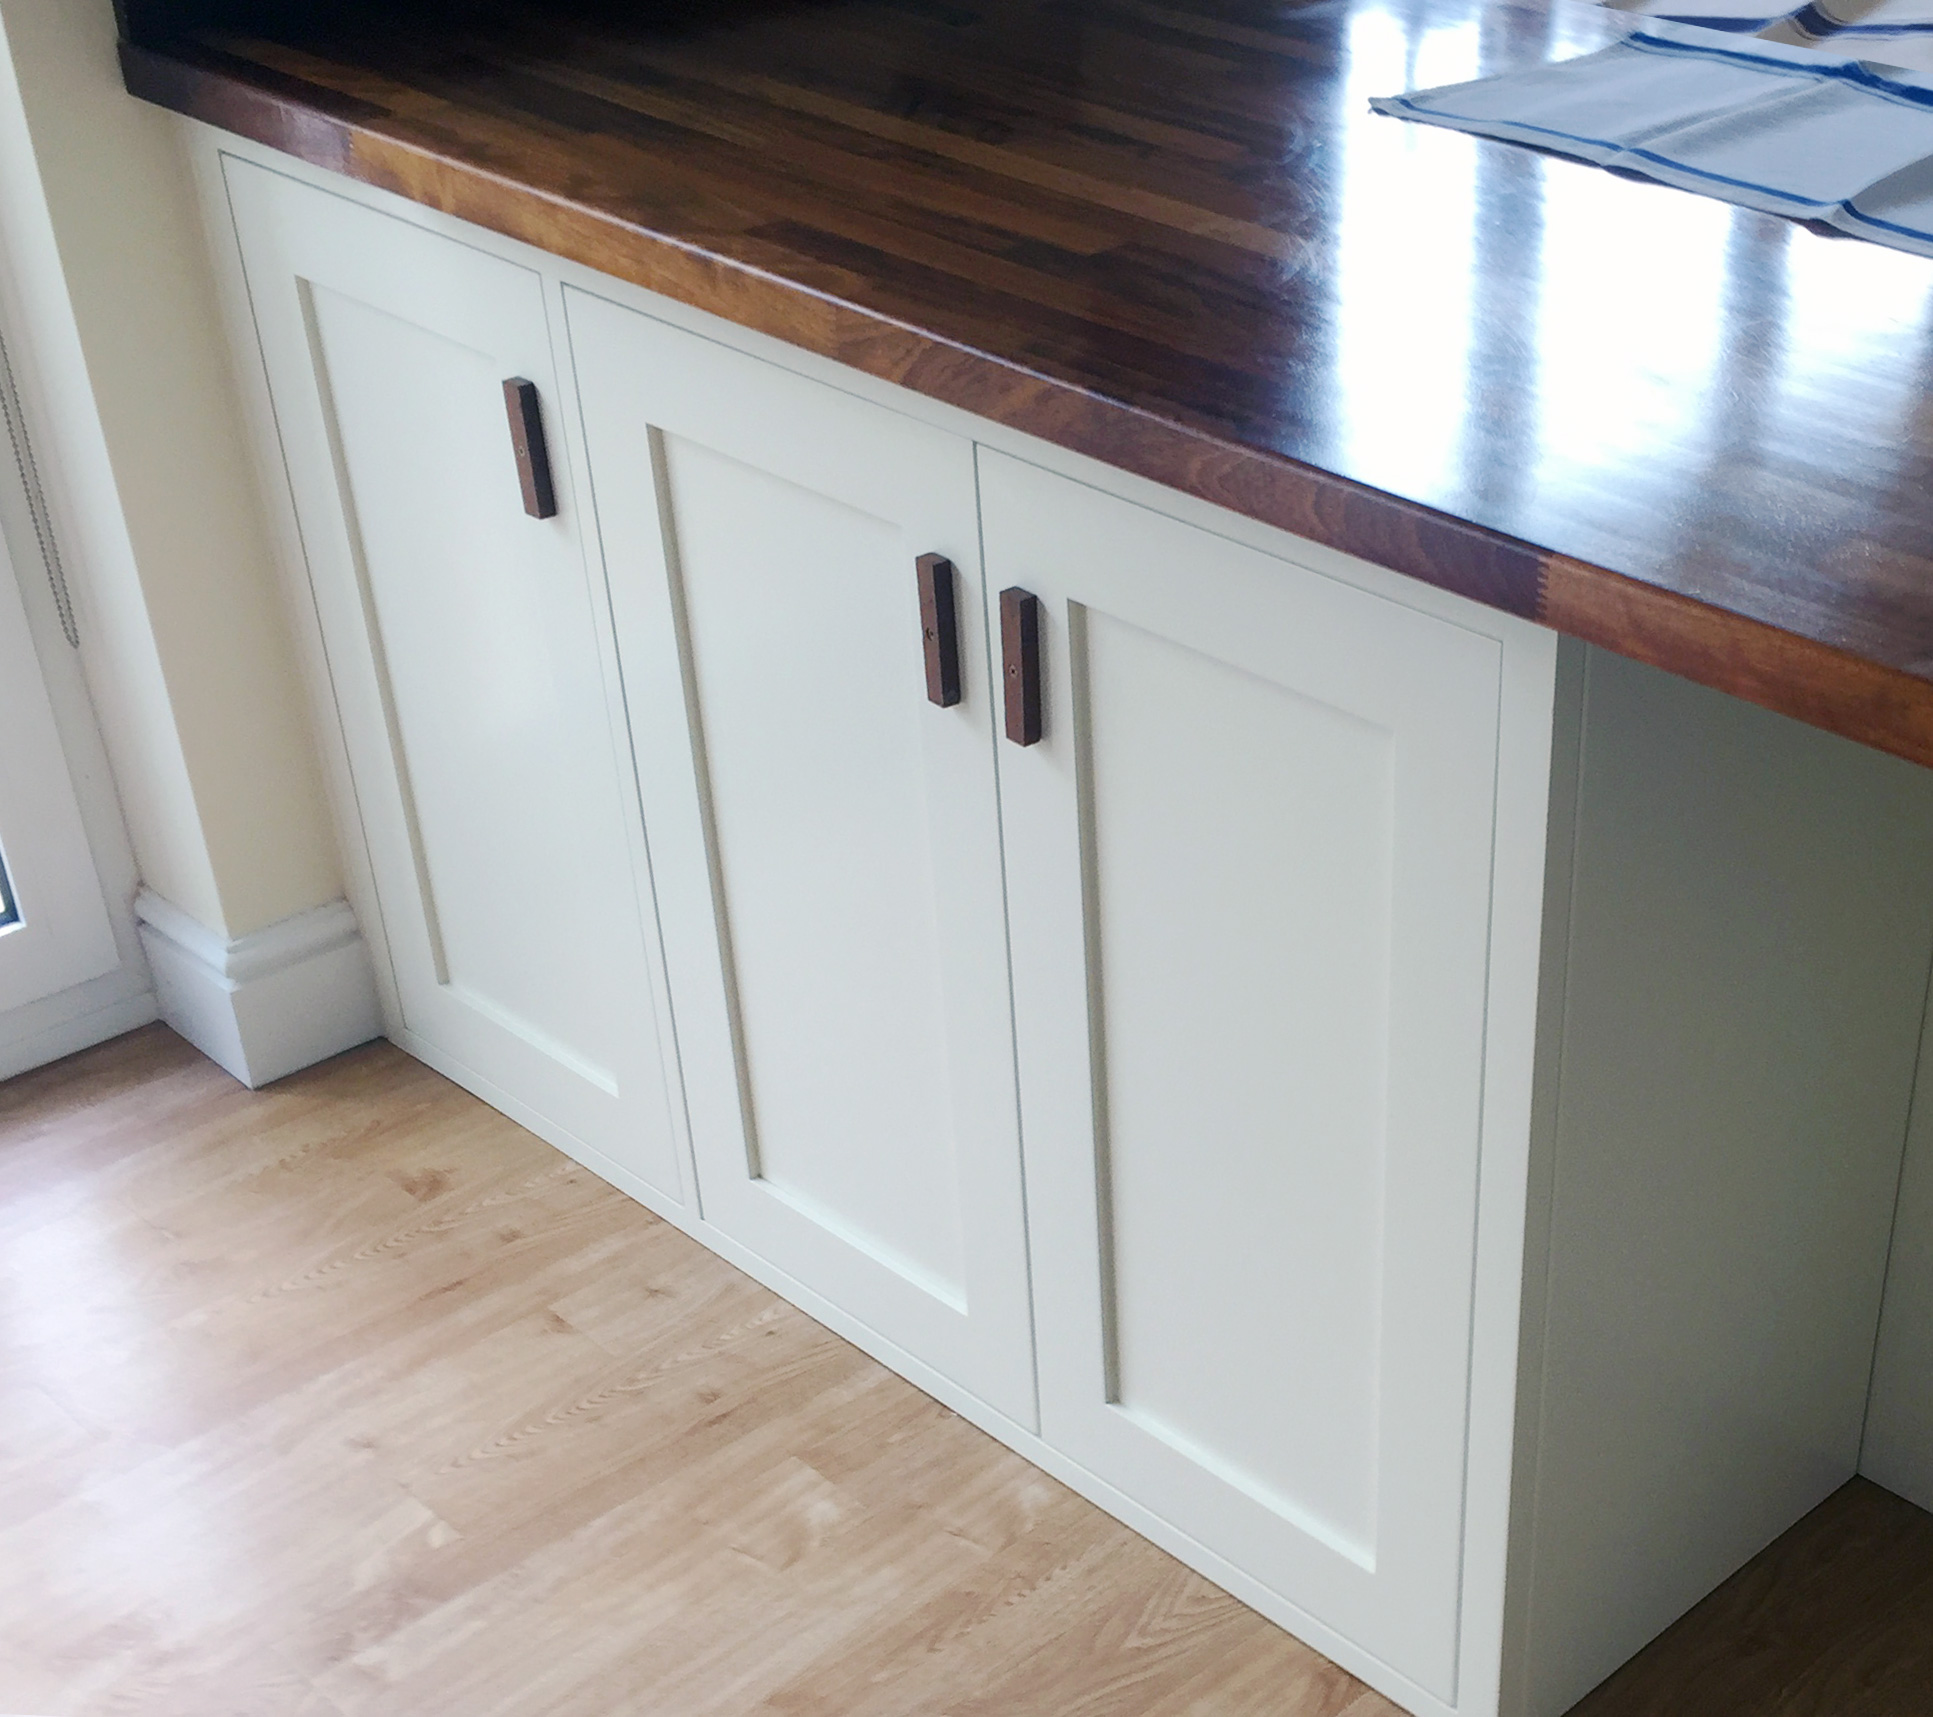 Bespoke kitchen cabinets sprayed white and finished with dark wood handles, designed, built, and installed by Tucker Joinery, Andover.